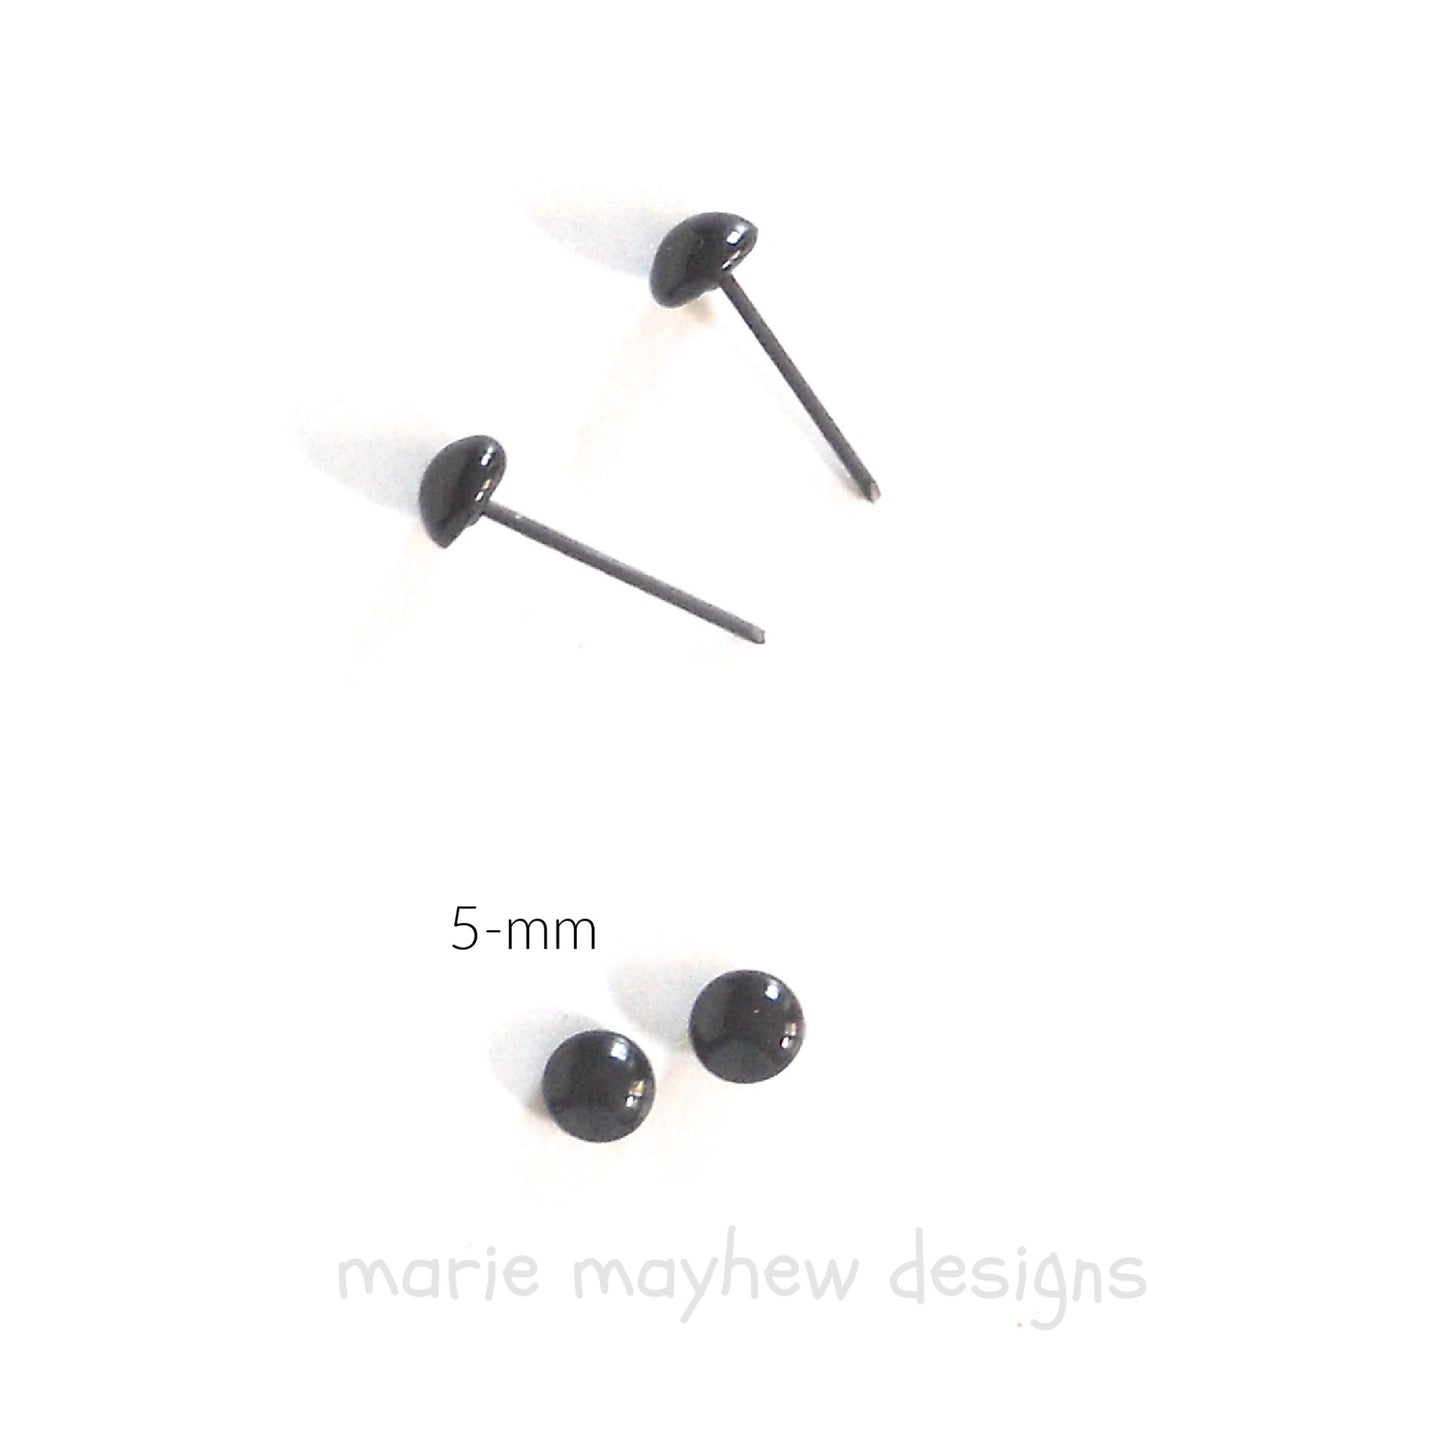 5-mm black glass eyes on wire pins